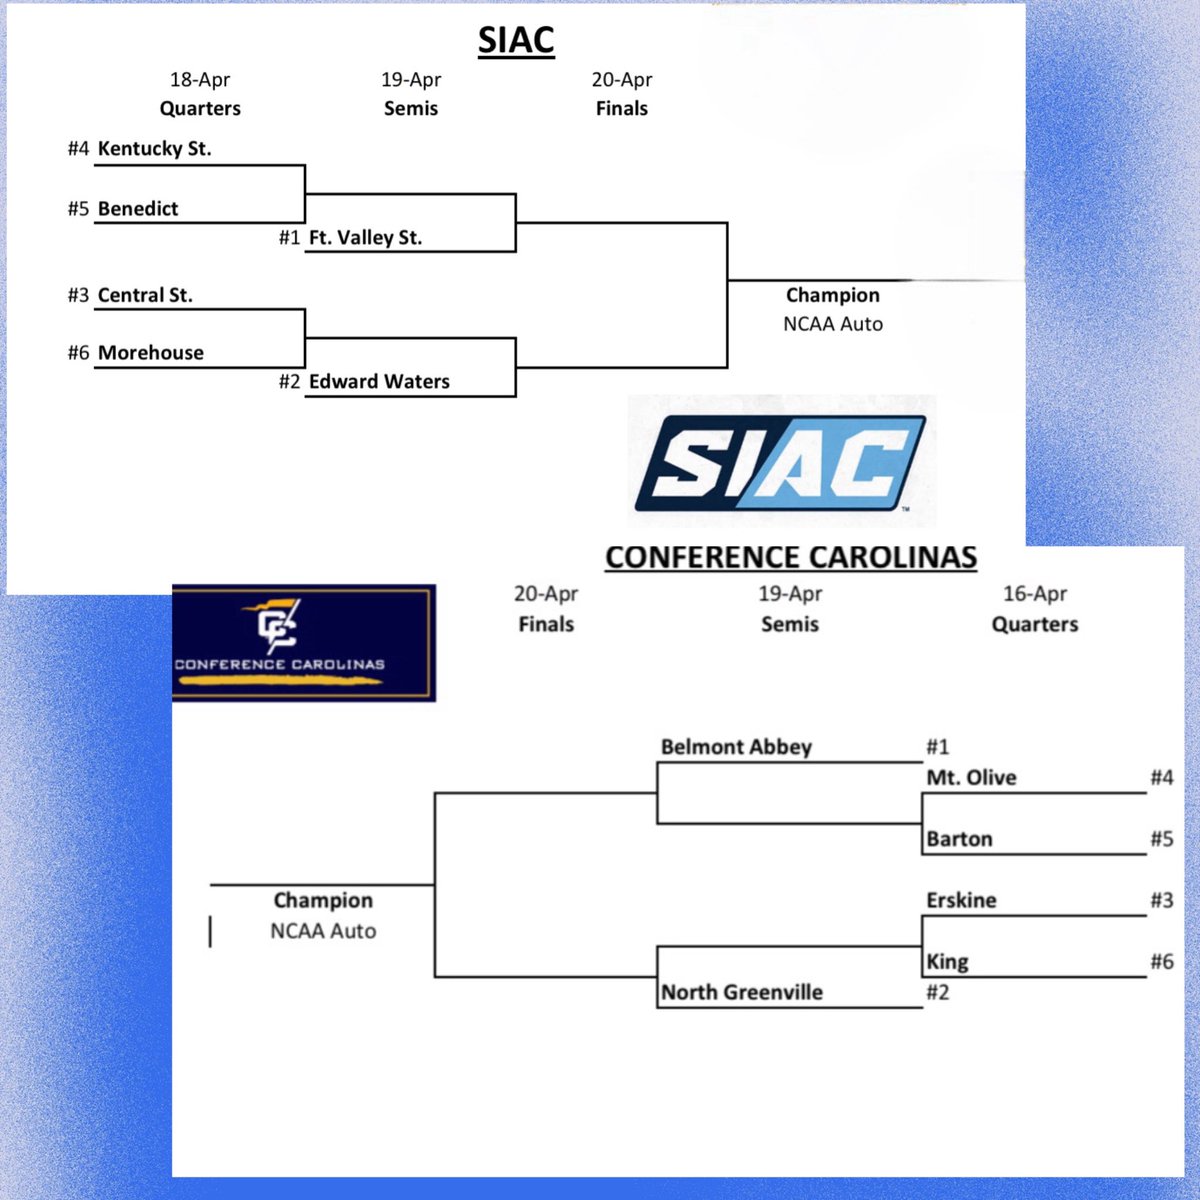 #NCAAMVB: Conference Tourney time for the @TheSIAC and @ConfCarolinas — WHO DO YOU HAVE? Let the MAYhem begin!!! First-ever auto-berth for SIAC! @VBMagazine @AVCAVolleyball